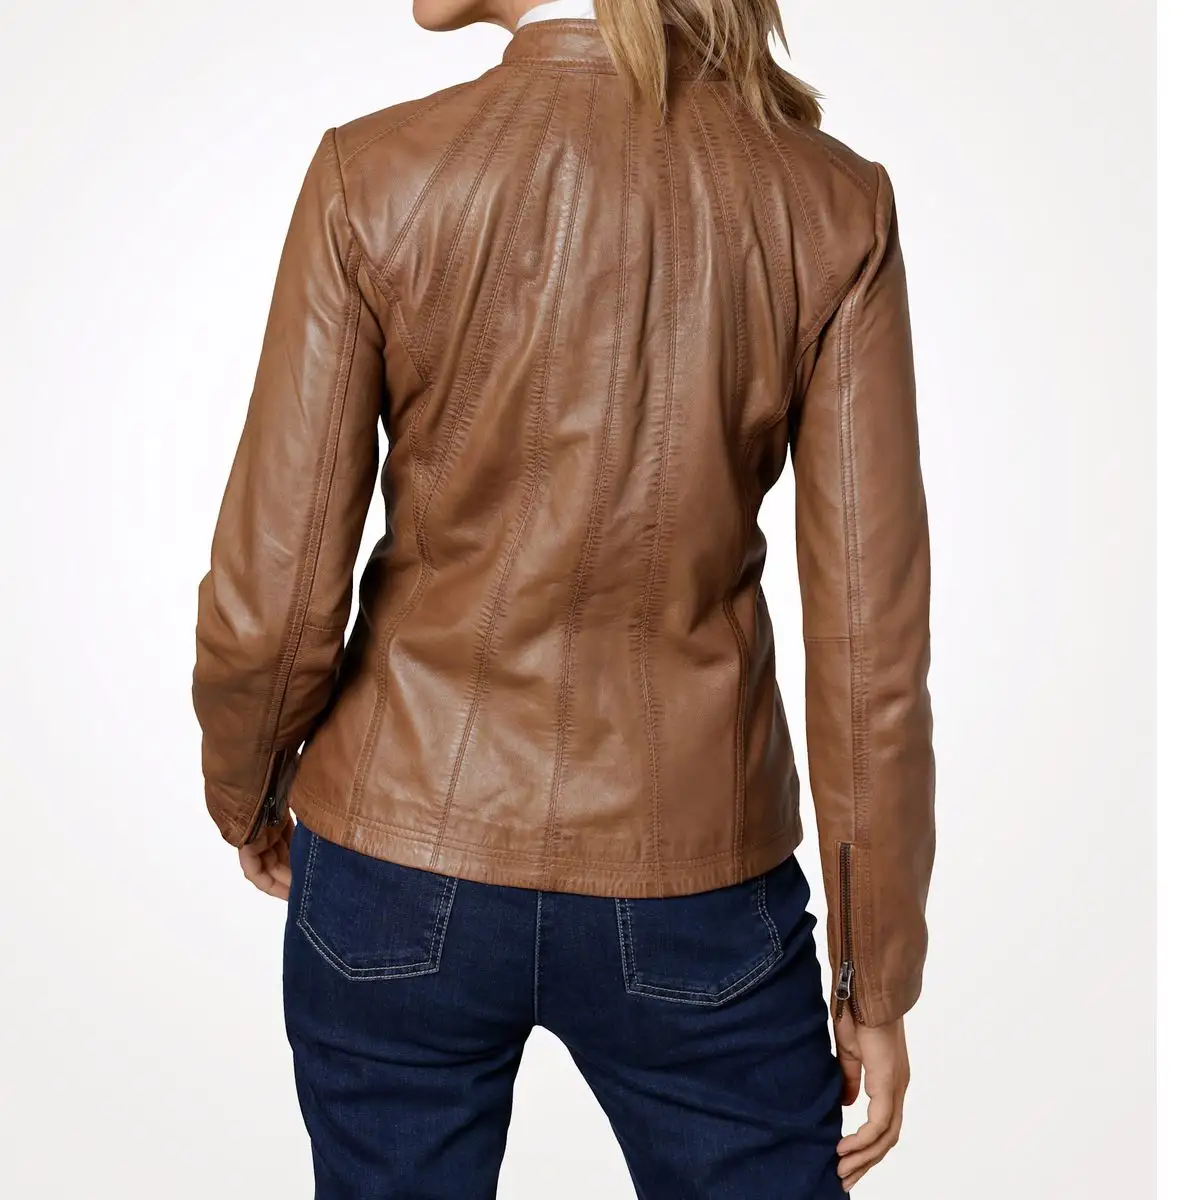 Famous brand ladies leather jacket with brown color stand collar zip up women jackets